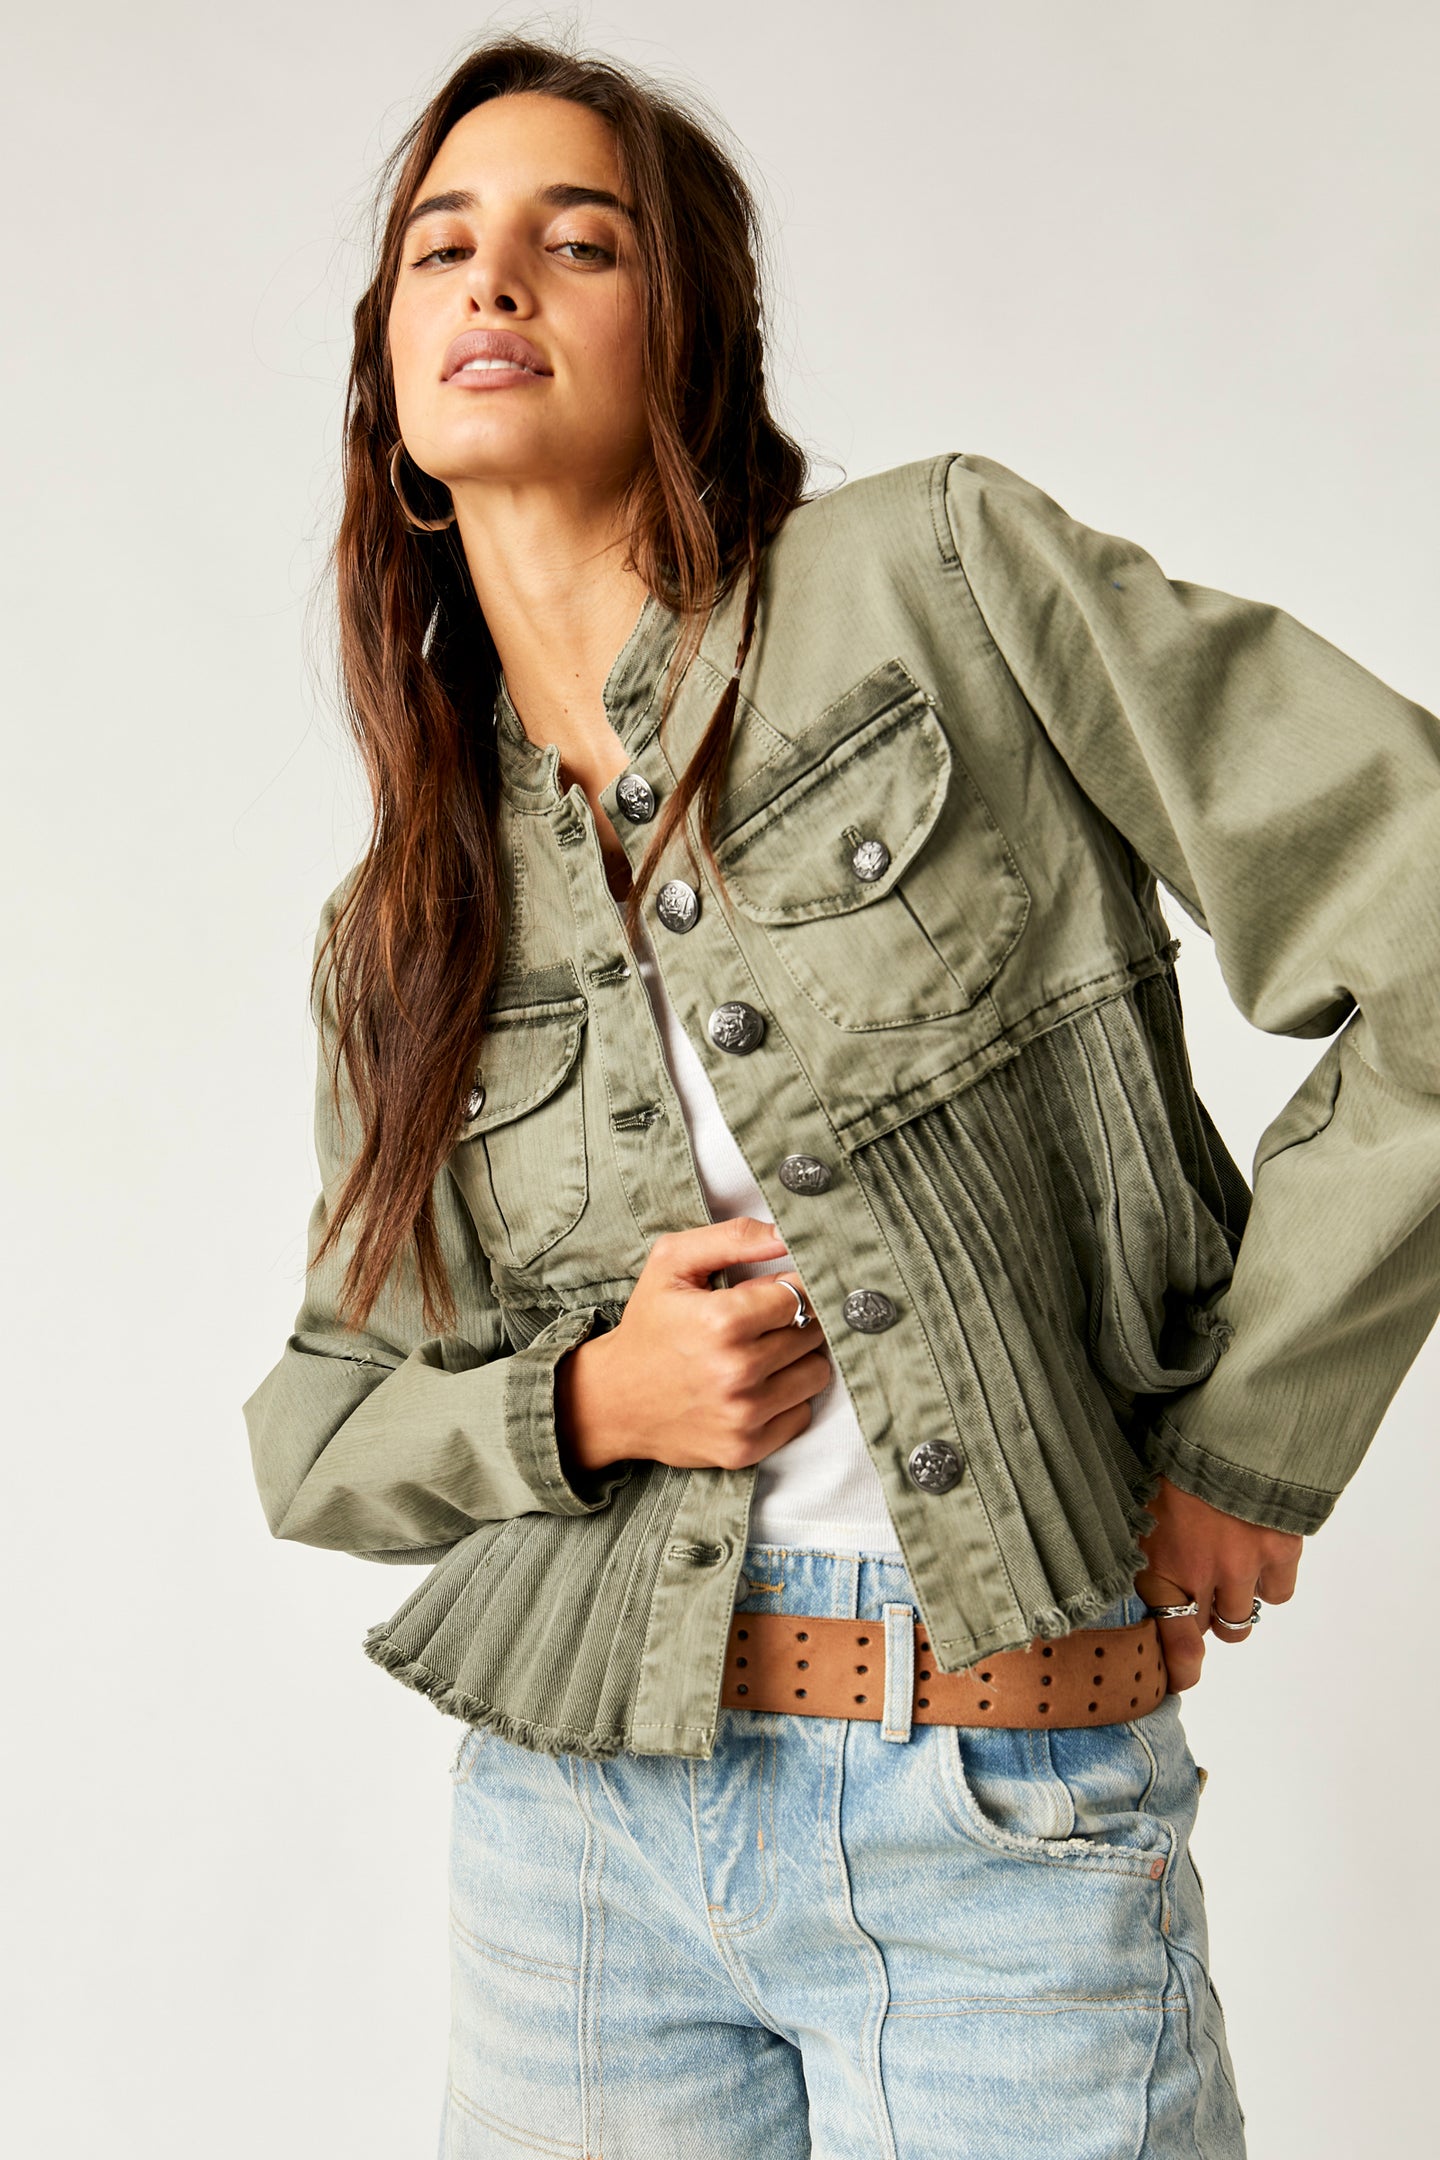 Free People Cassidy Jacket OB1703790 - Above The Crowd Boutique